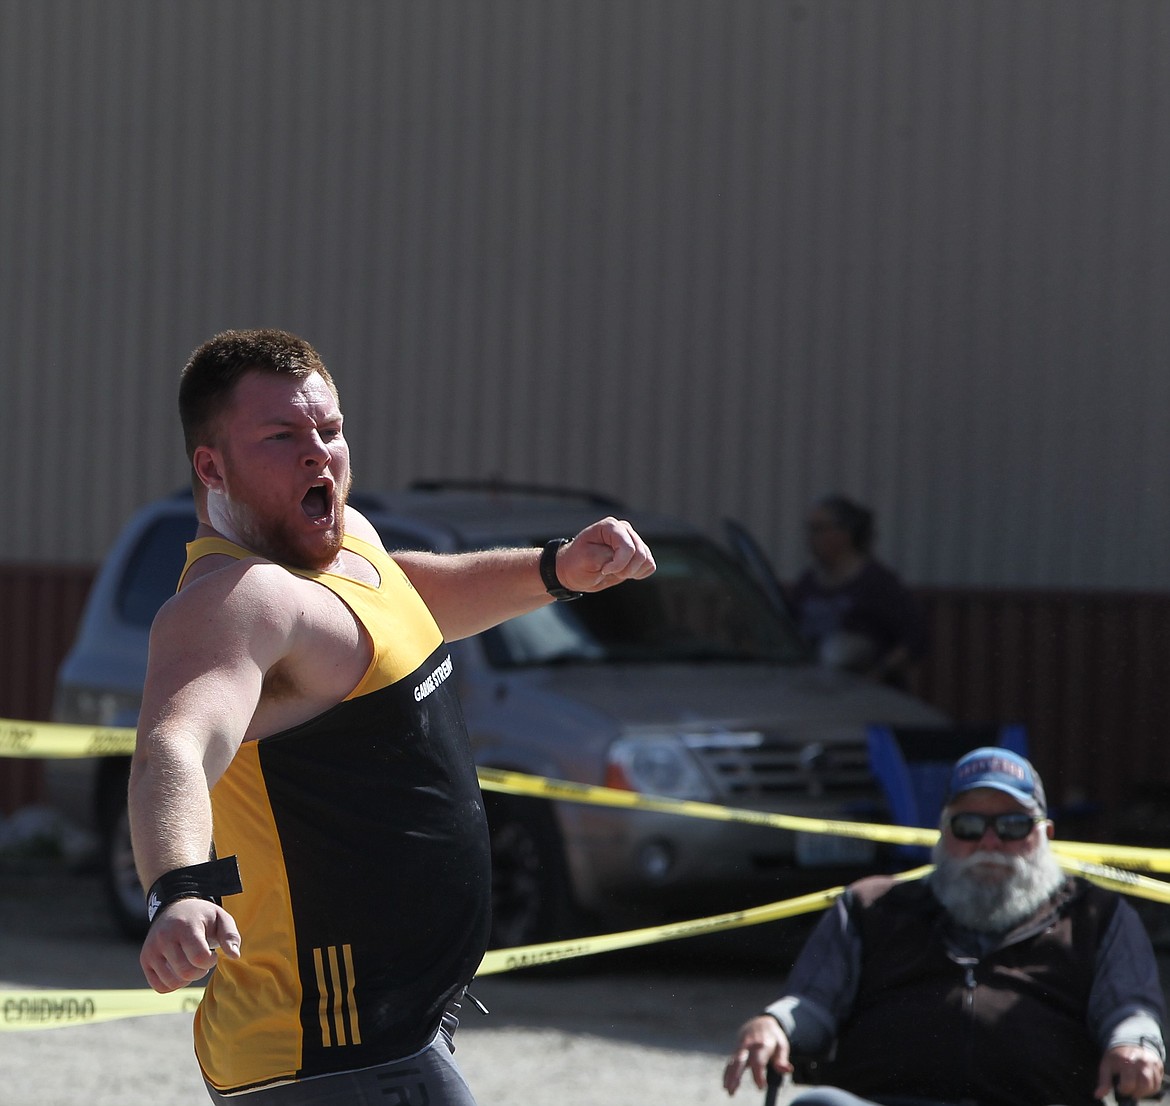 JASON ELLIOTT/Press
Lucas Warning reacts after watching his attempt in the men's shot put during the Iron Wood Throws Classic on Saturday in Rathdrum.